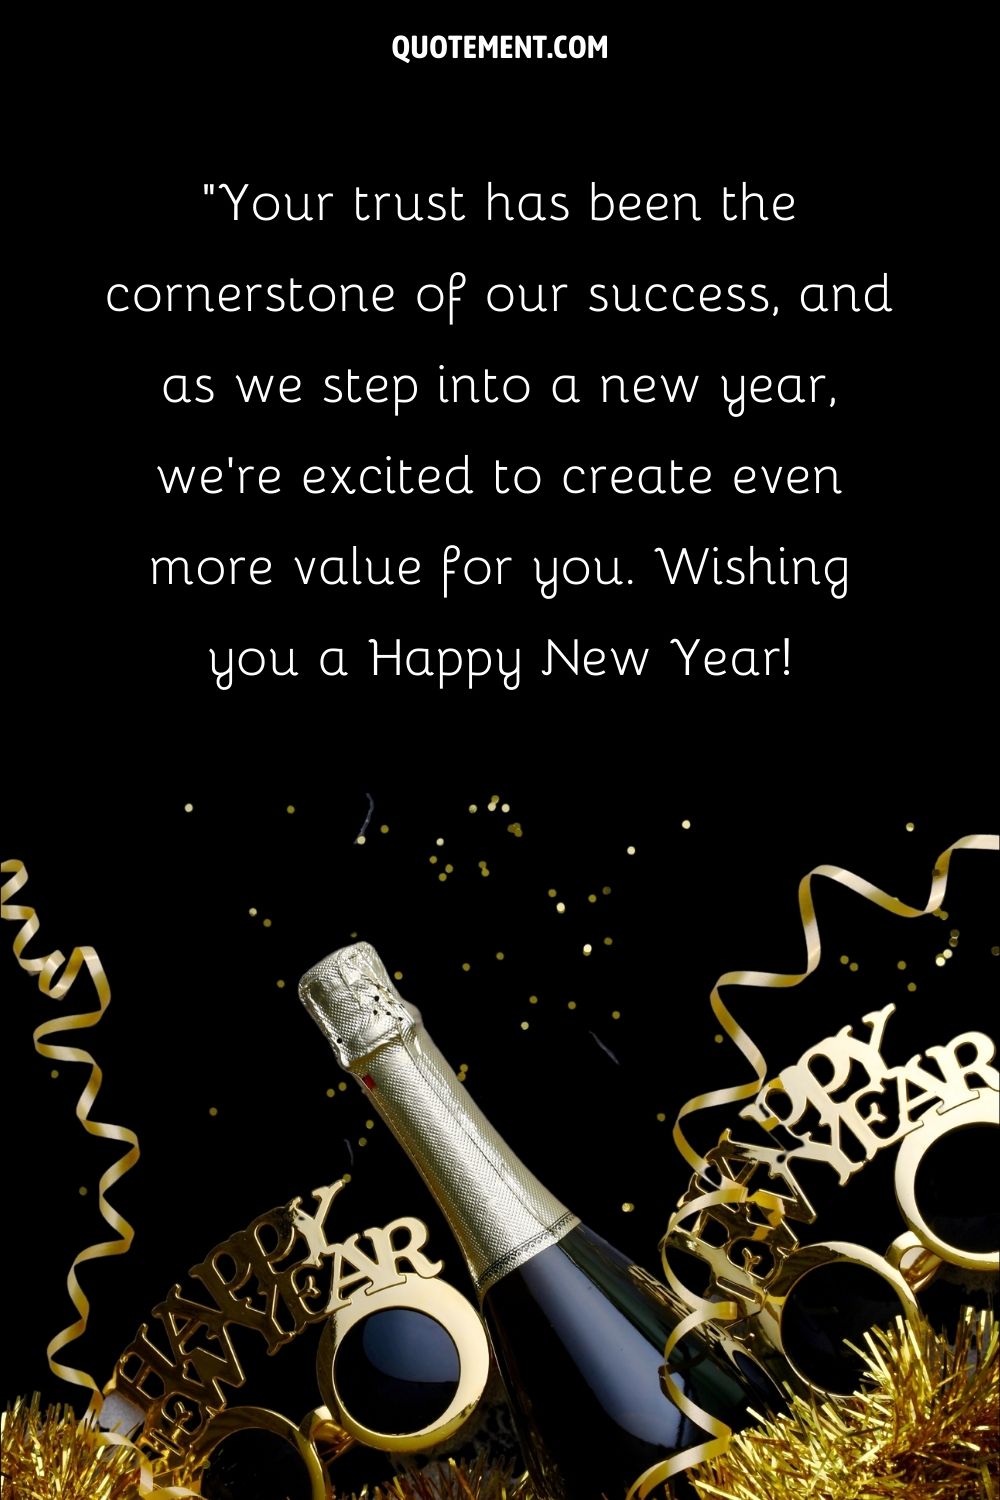 A bottle of champagne set against a black background with golden New Year's decorations
